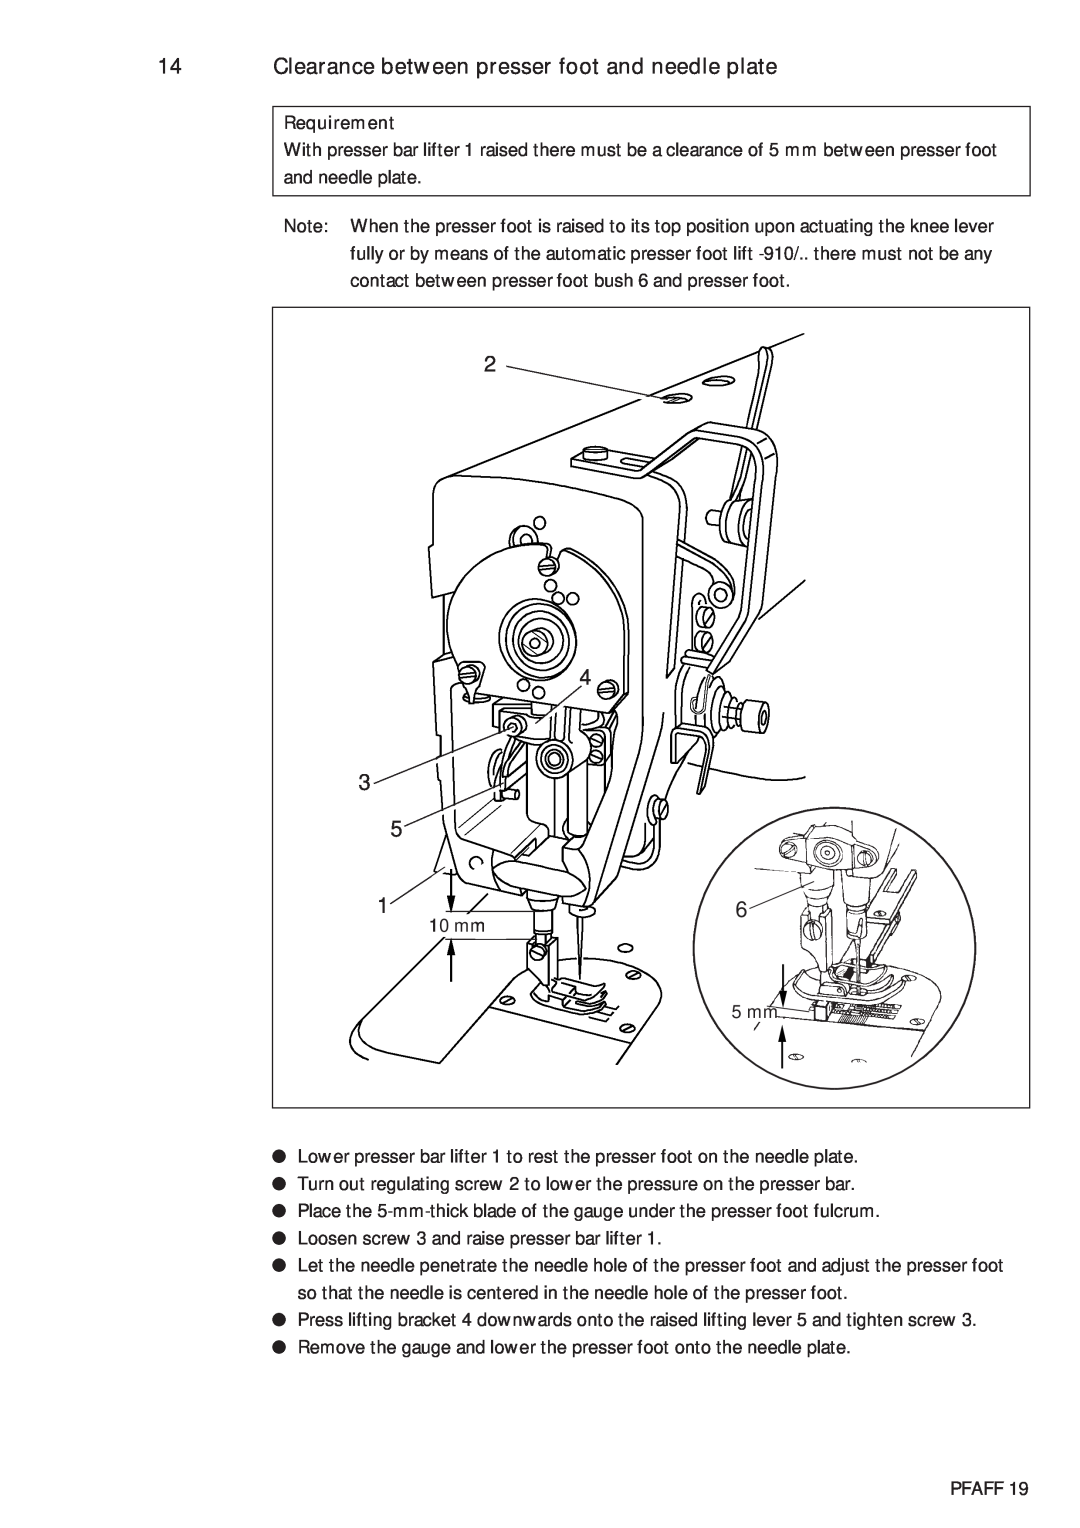 Pfaff 483, 481 service manual Clearance between presser foot and needle plate 